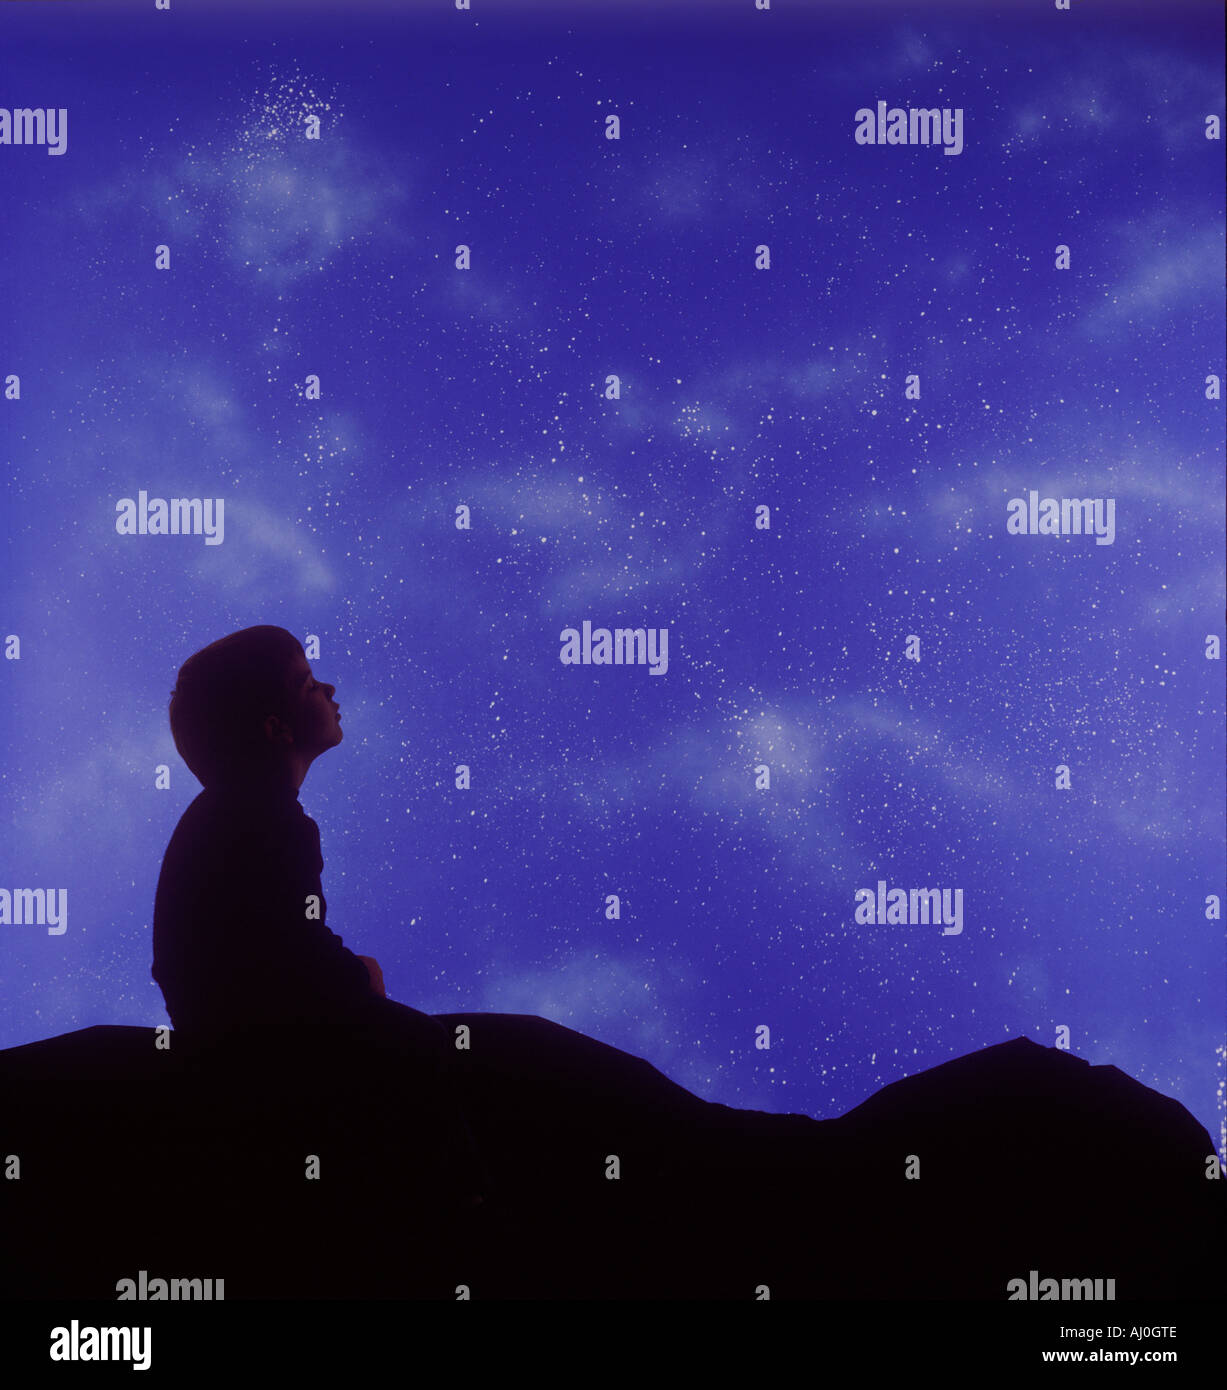 Child Looking At Night Sky Stock Photos & Child Looking At Night Sky ...